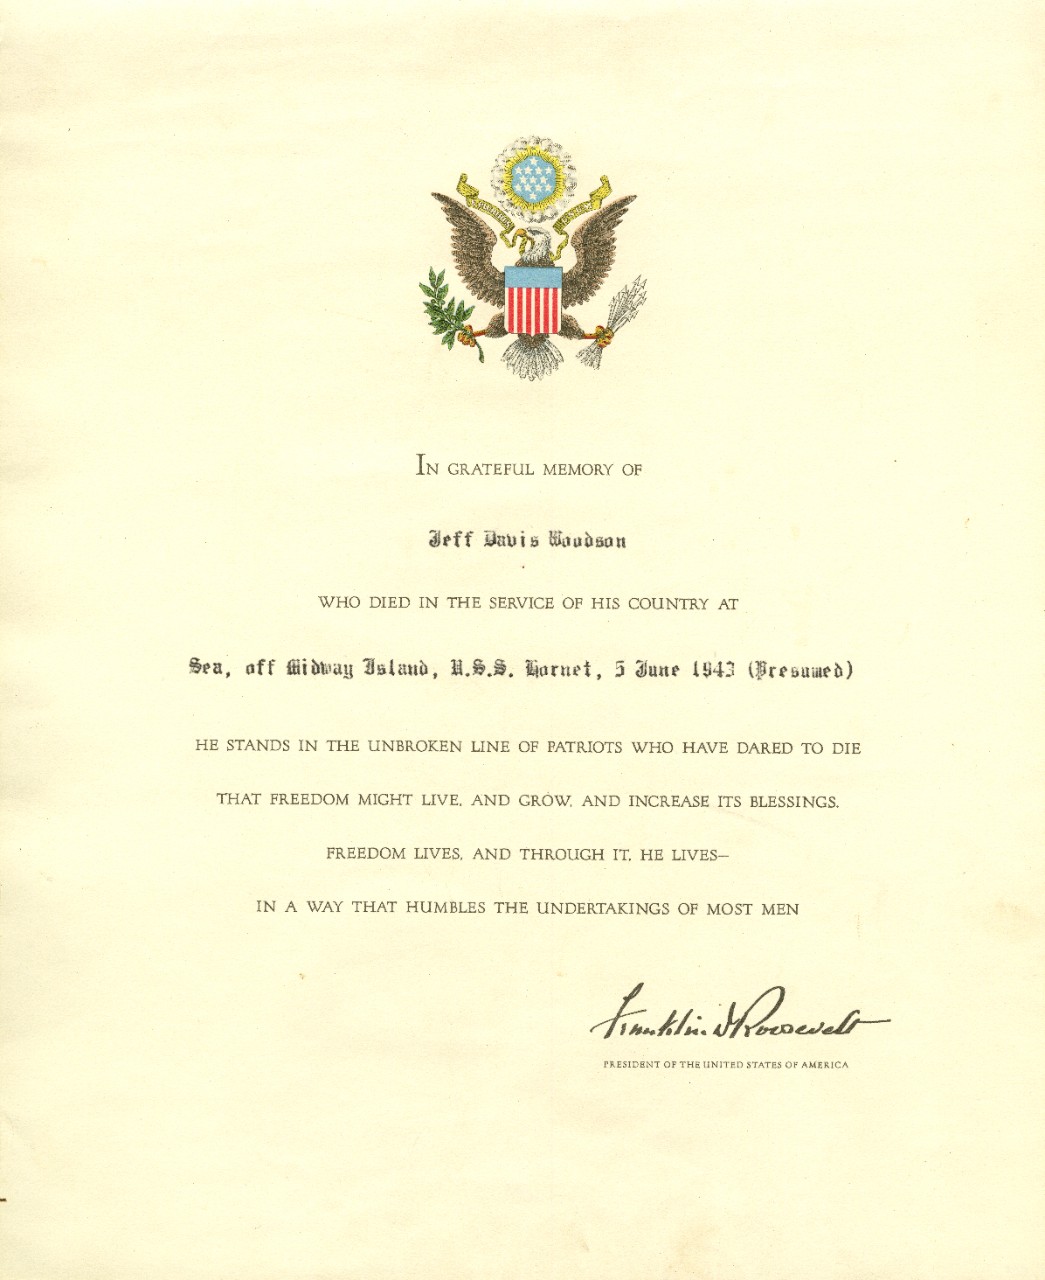 Official memorial certificate marking the loss of LTJG Jeff Davis Woodson at the Battle of Midway signed by President Franklin D. Roosevelt. Body of certificate reads "In Grateful Memory of / Jeff Davis Woodson / who died in the service of his co...